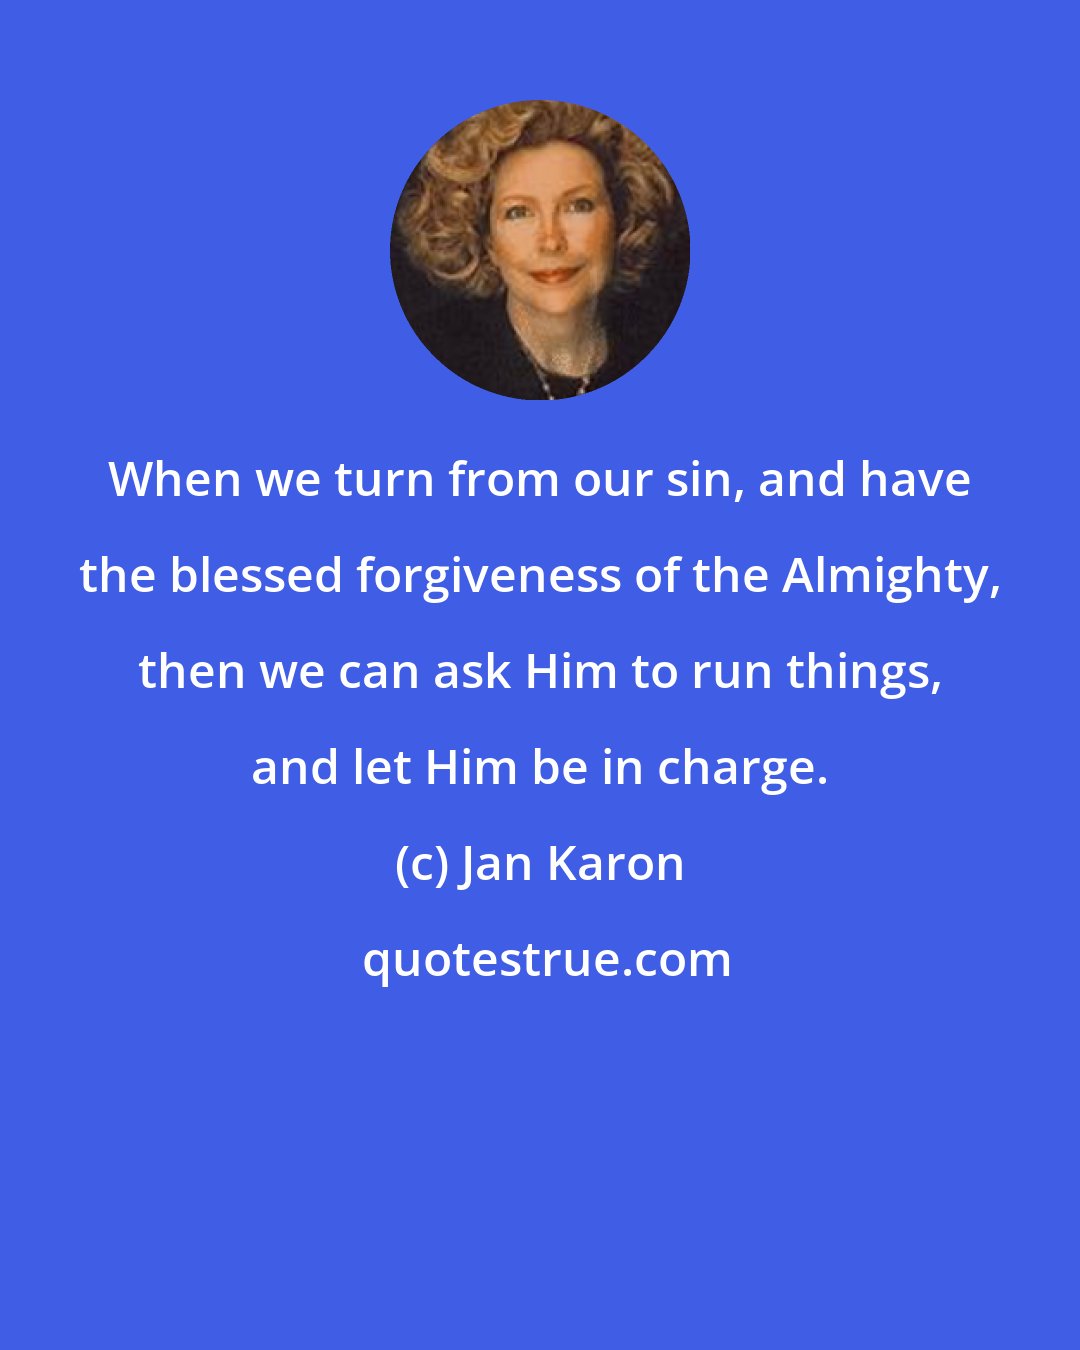 Jan Karon: When we turn from our sin, and have the blessed forgiveness of the Almighty, then we can ask Him to run things, and let Him be in charge.